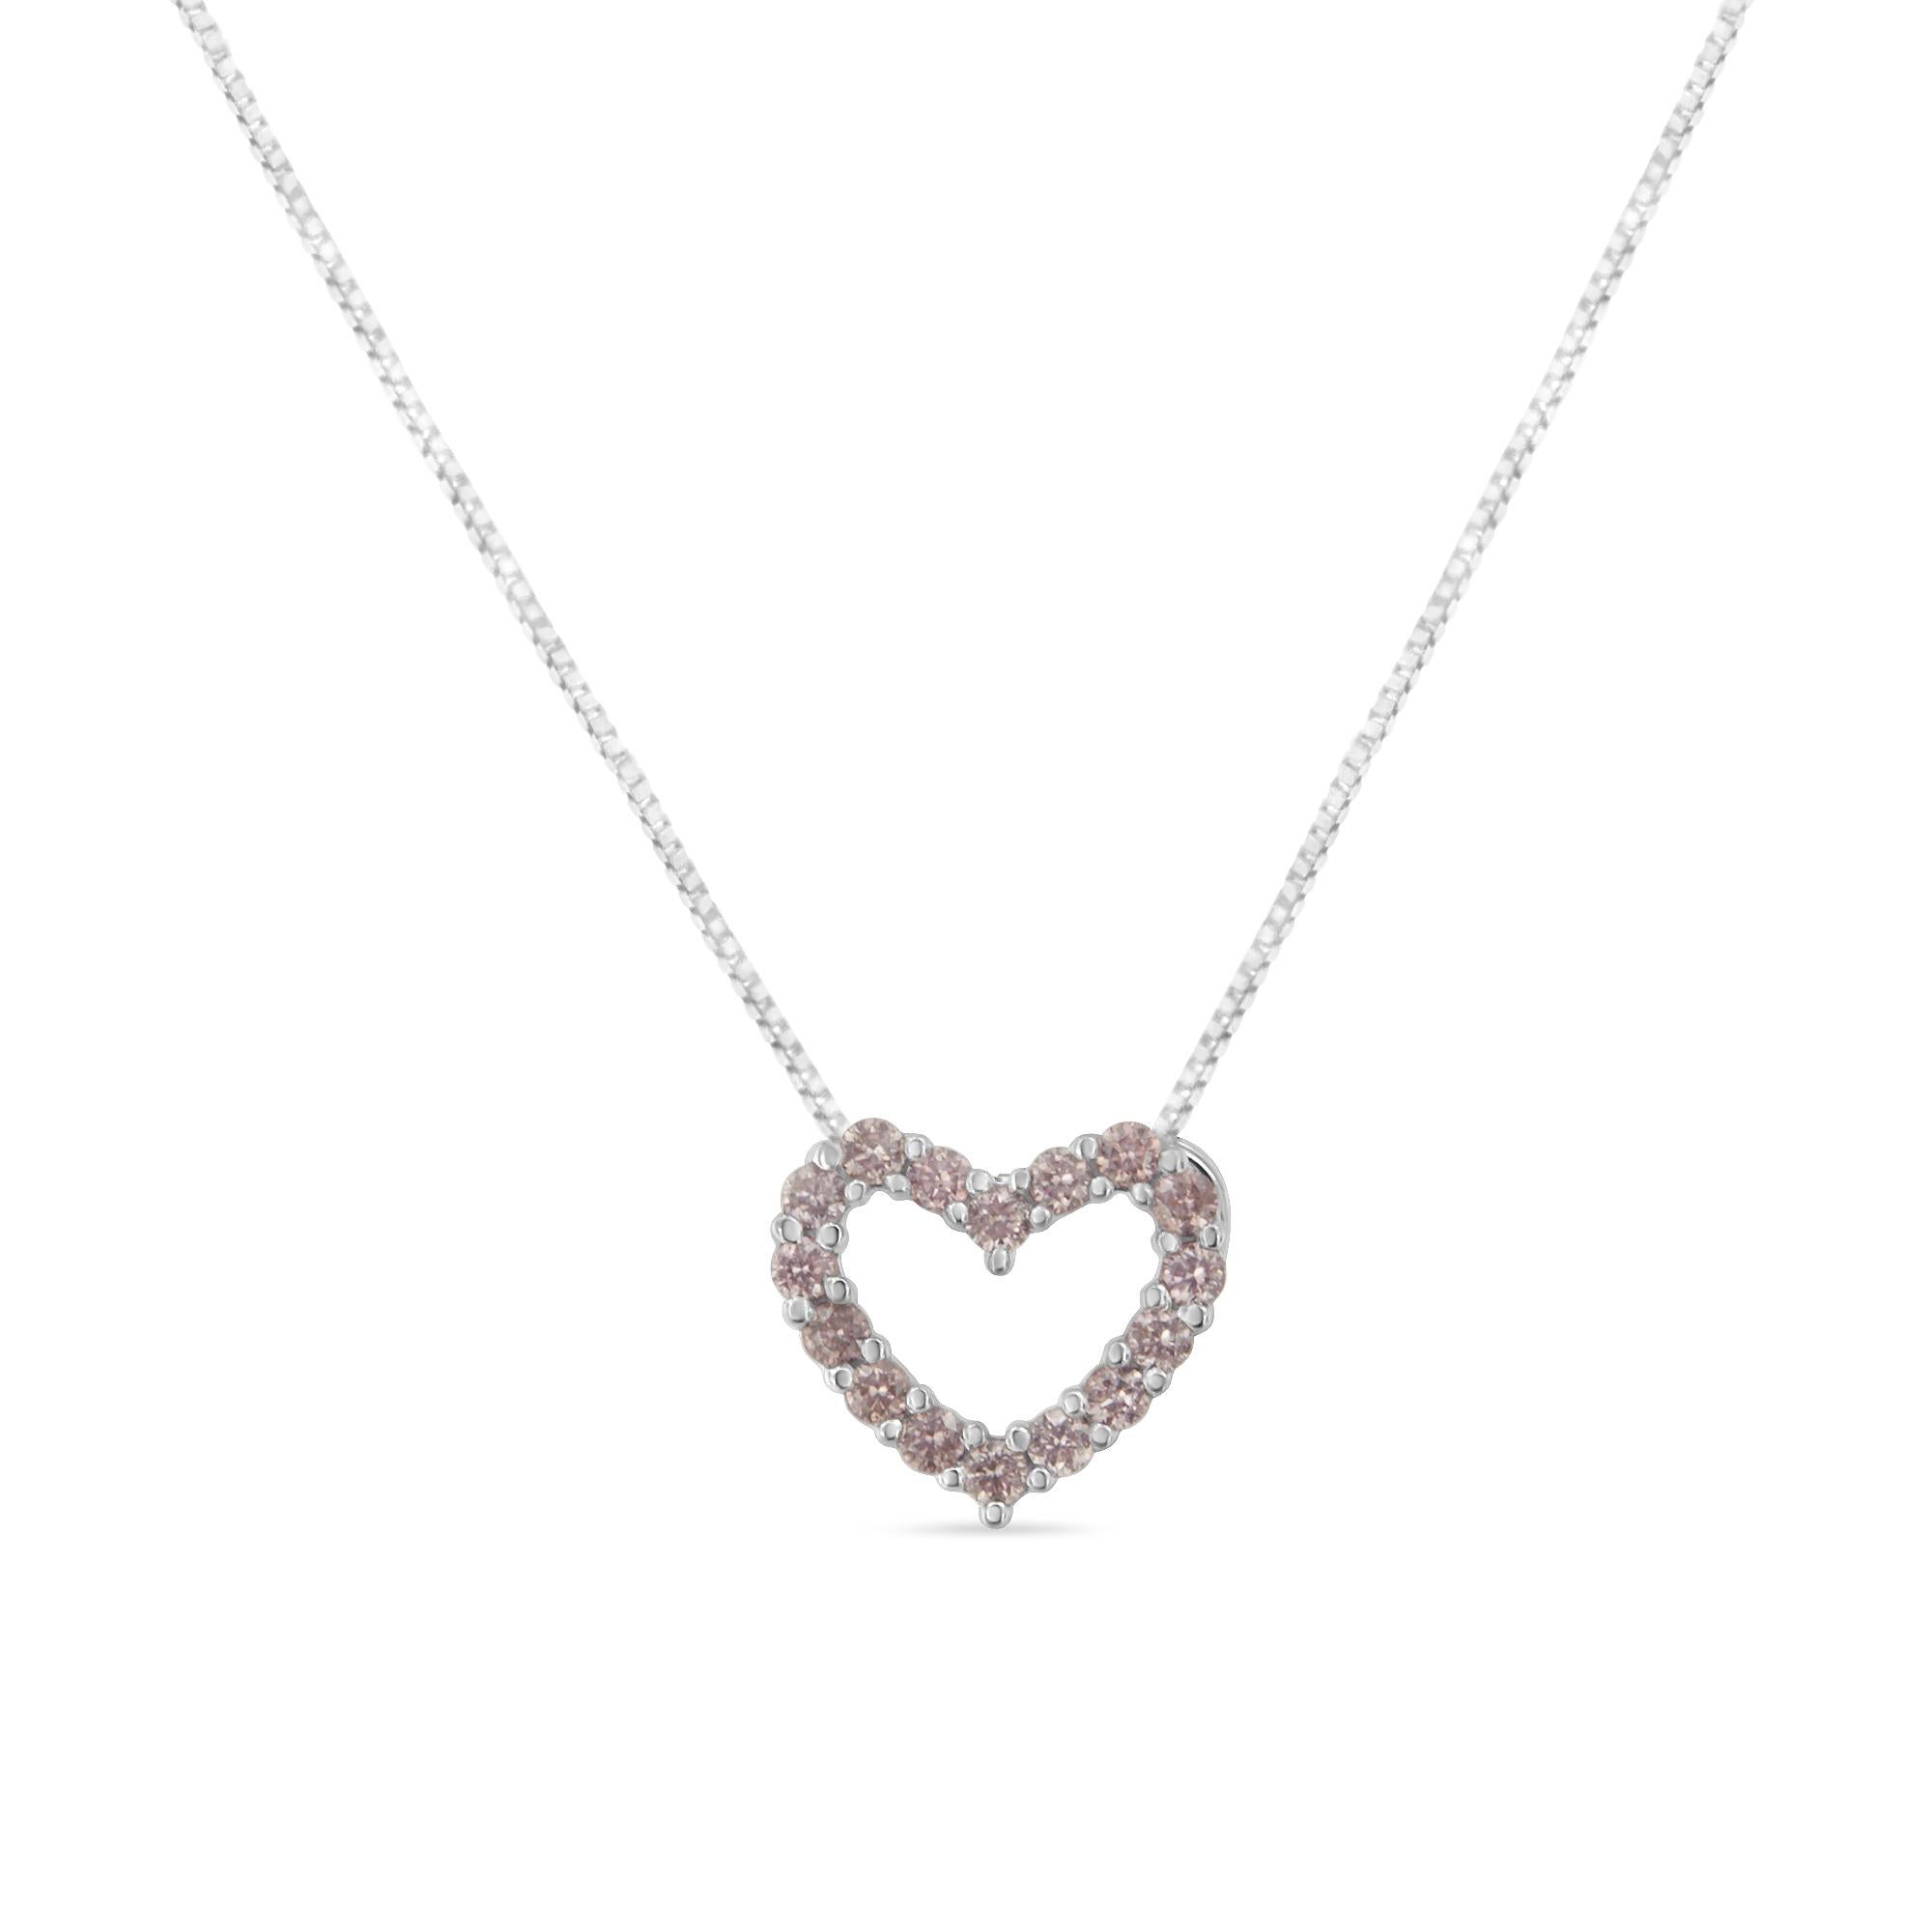 A pink diamond is always a gorgeous choice, and this pink diamond studded heart takes center stage. This  heart-shaped necklace is composed of 16 real, natural light pink diamonds. Each round diamond is set within prongs in 14 karat white gold to